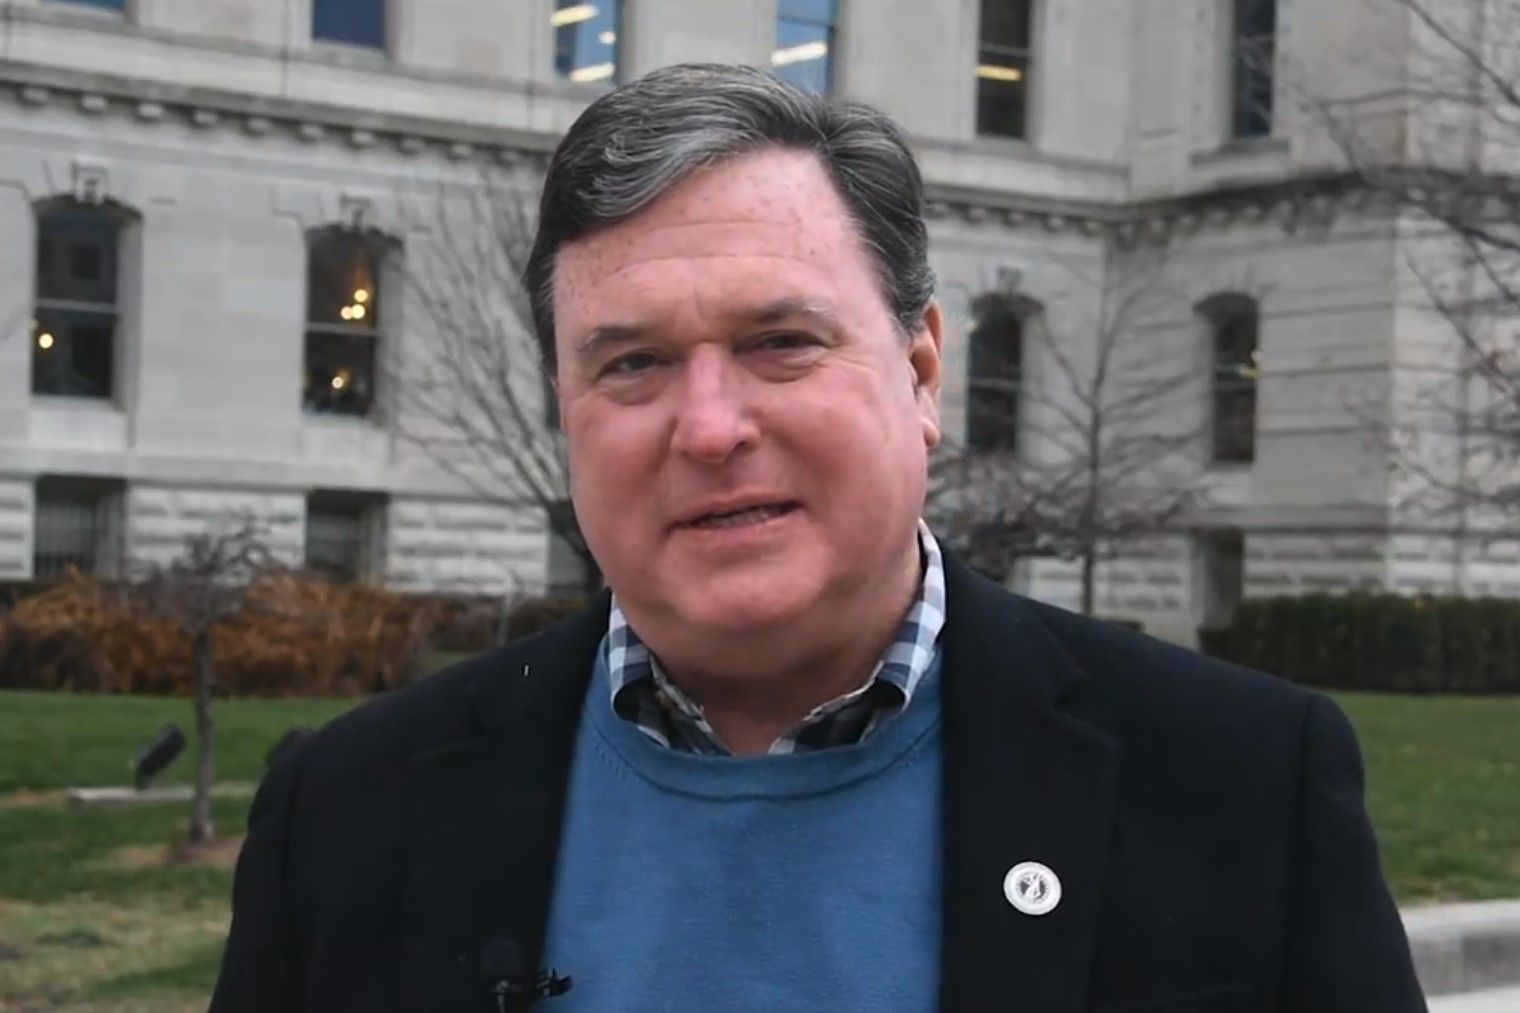 Indiana Attorney Todd Rokita is pictured in front of the Statehouse in an official video.